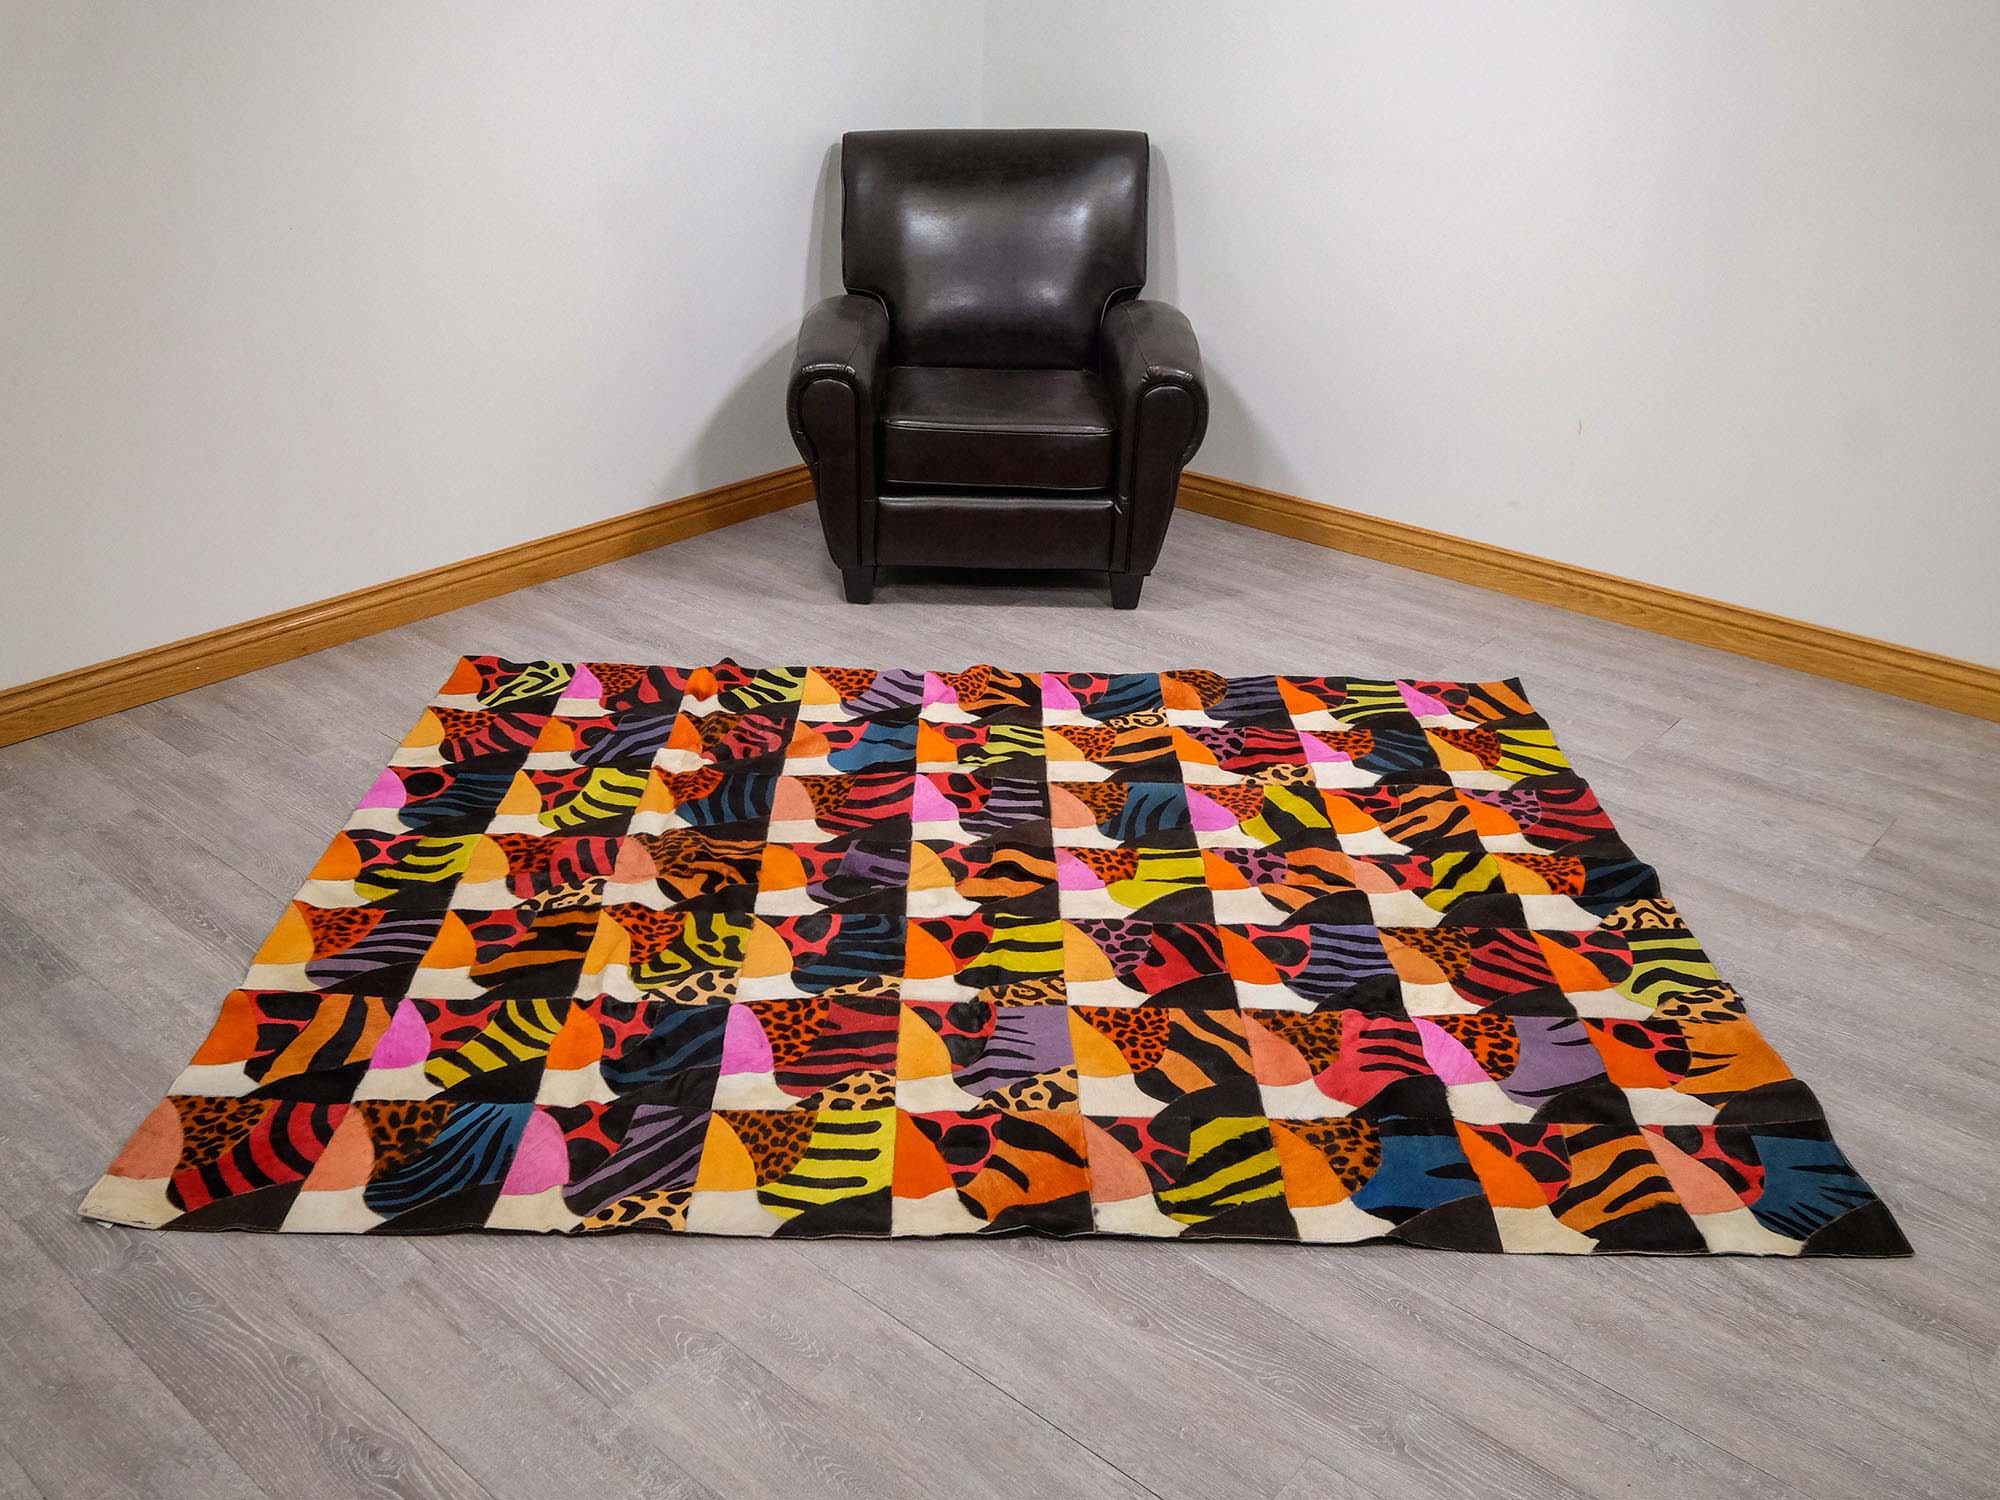 Cow Hide Carpet: Dyed Patchwork: Gallery Item 